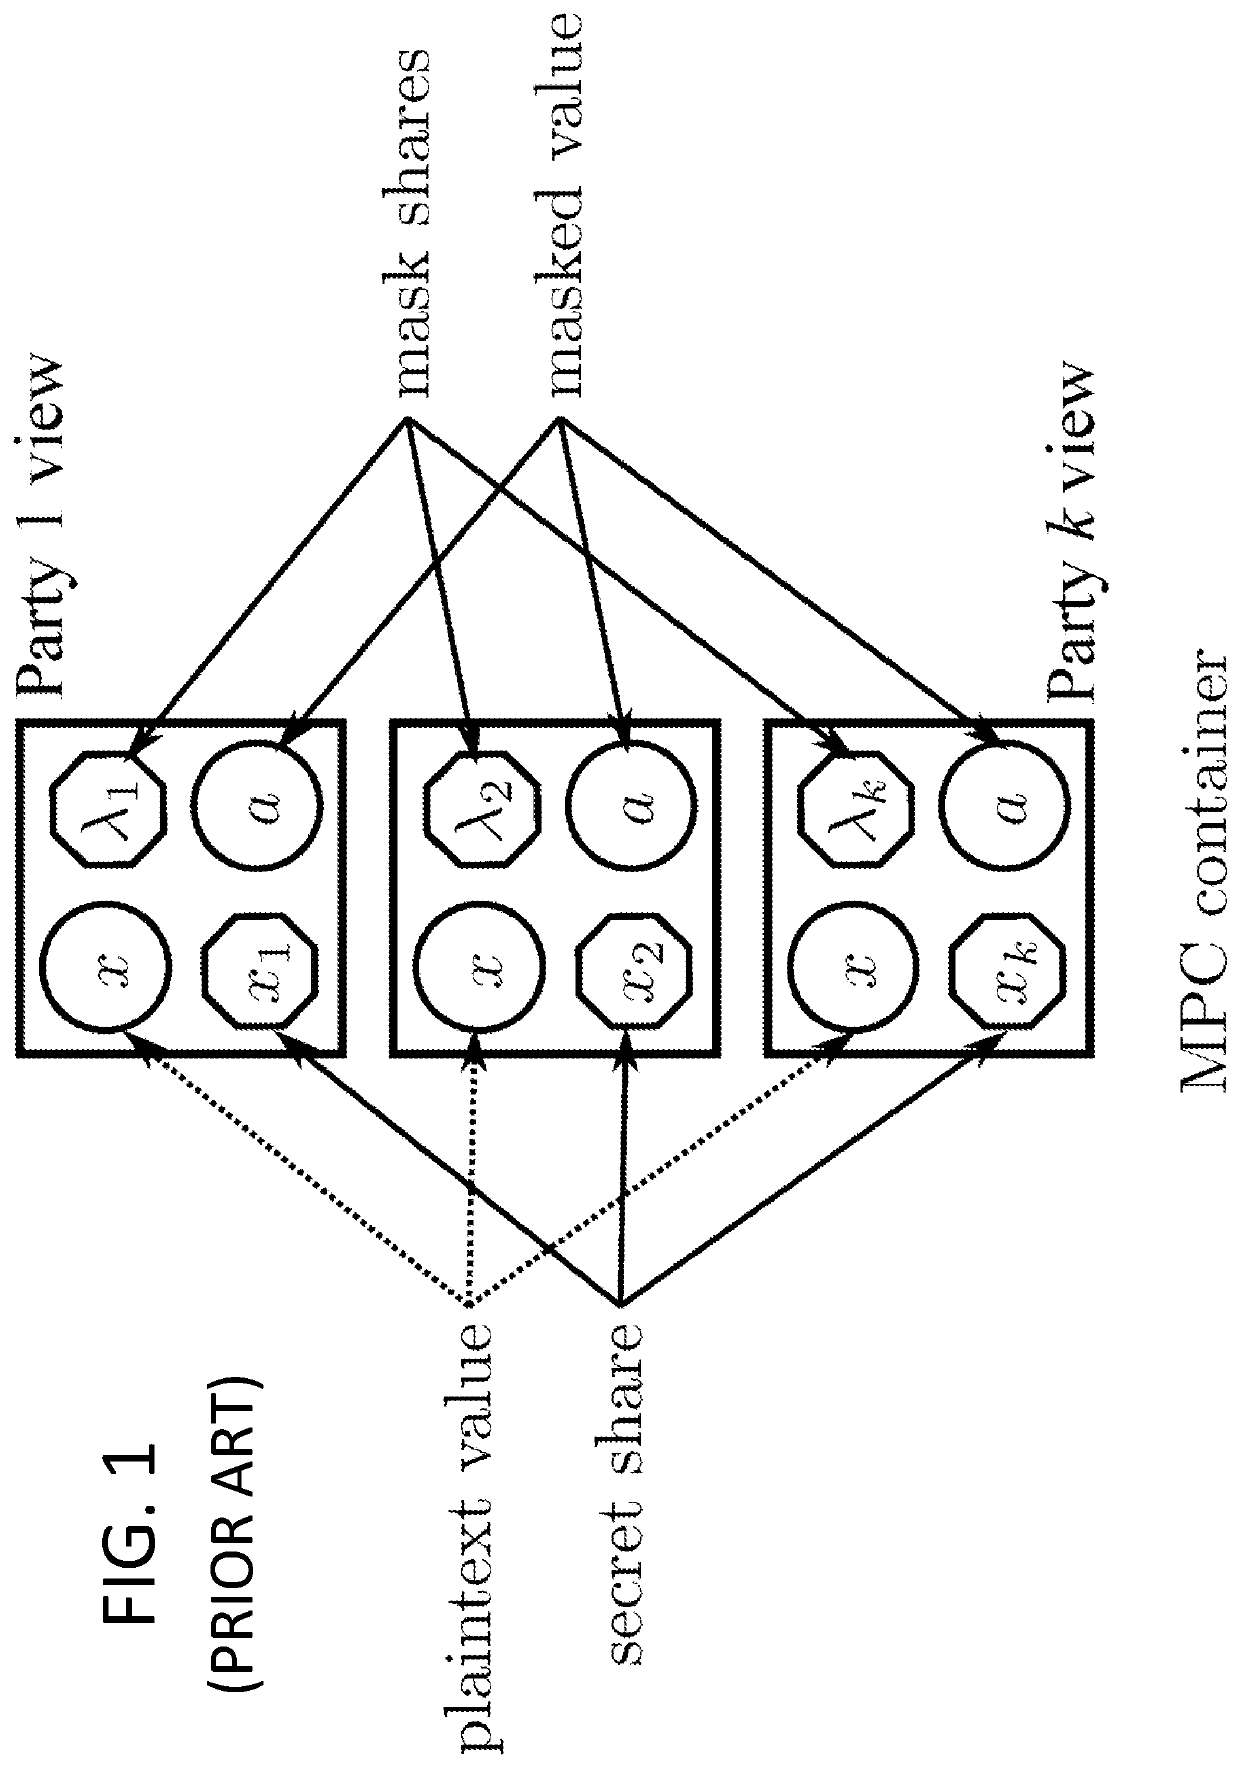 Arithmetic for secure multi-party computation with modular integers